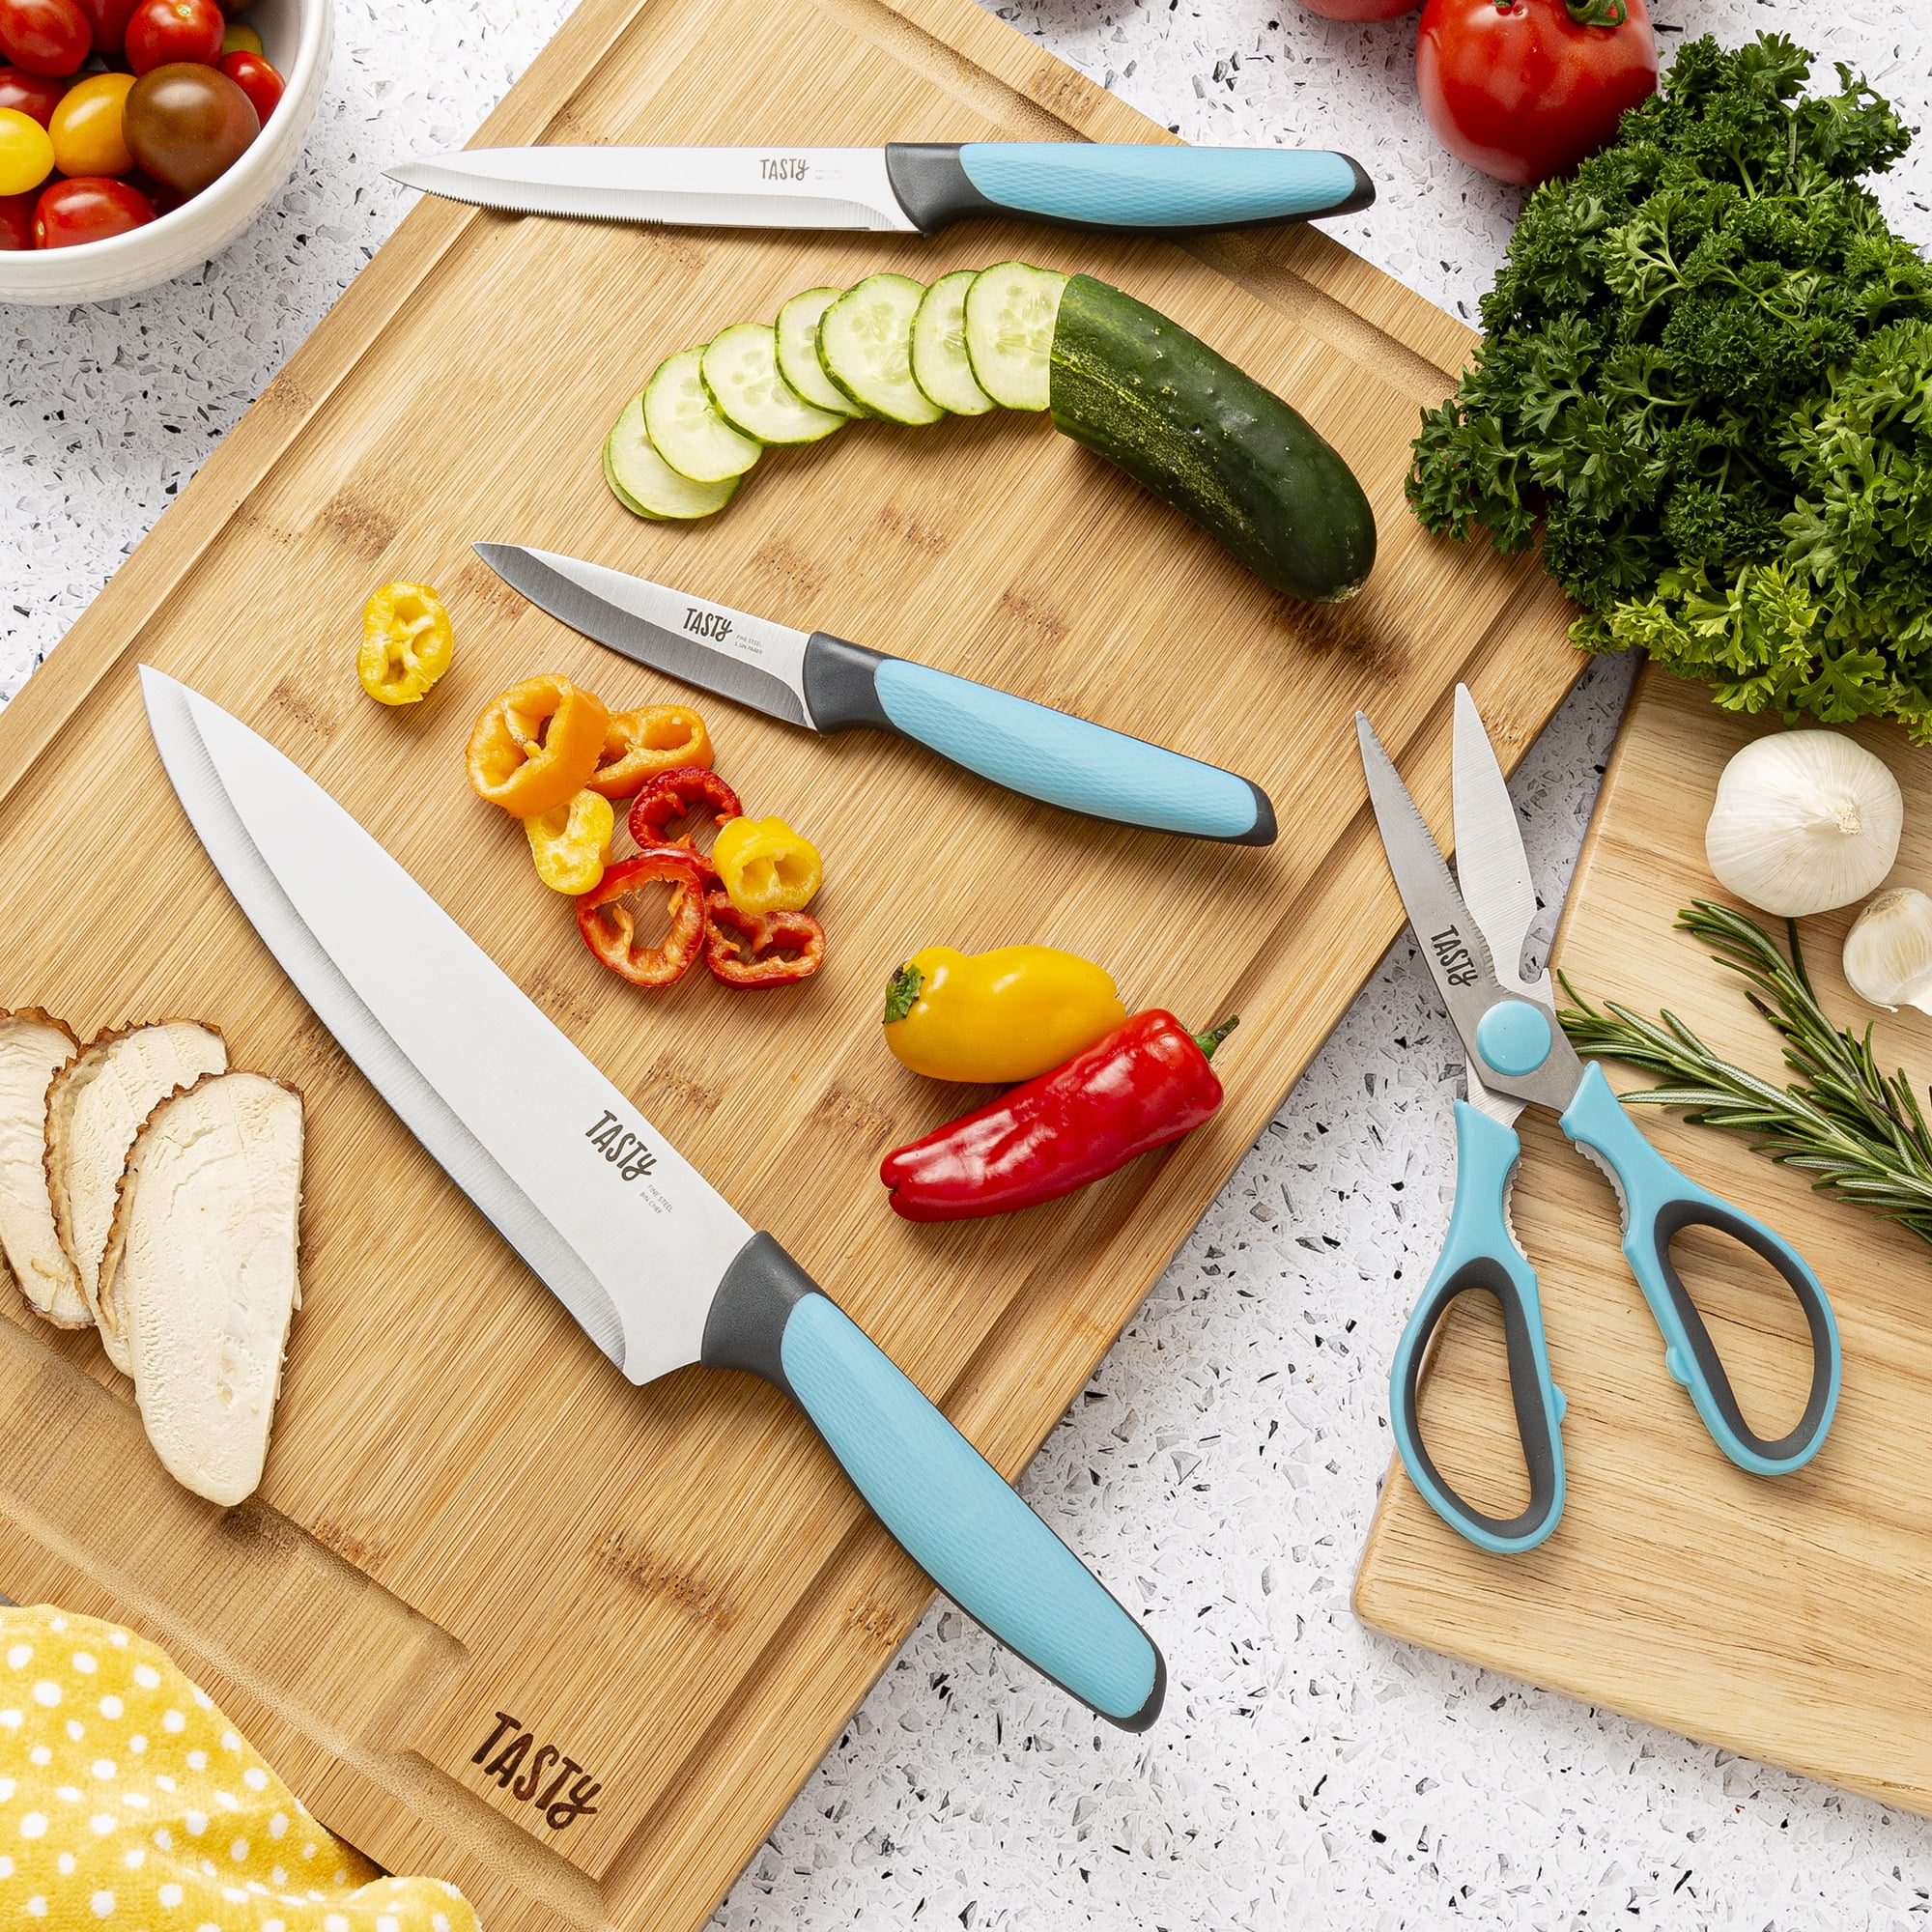 Tasty Home - Neutrals? Nah. This cutlery is as colorful as your